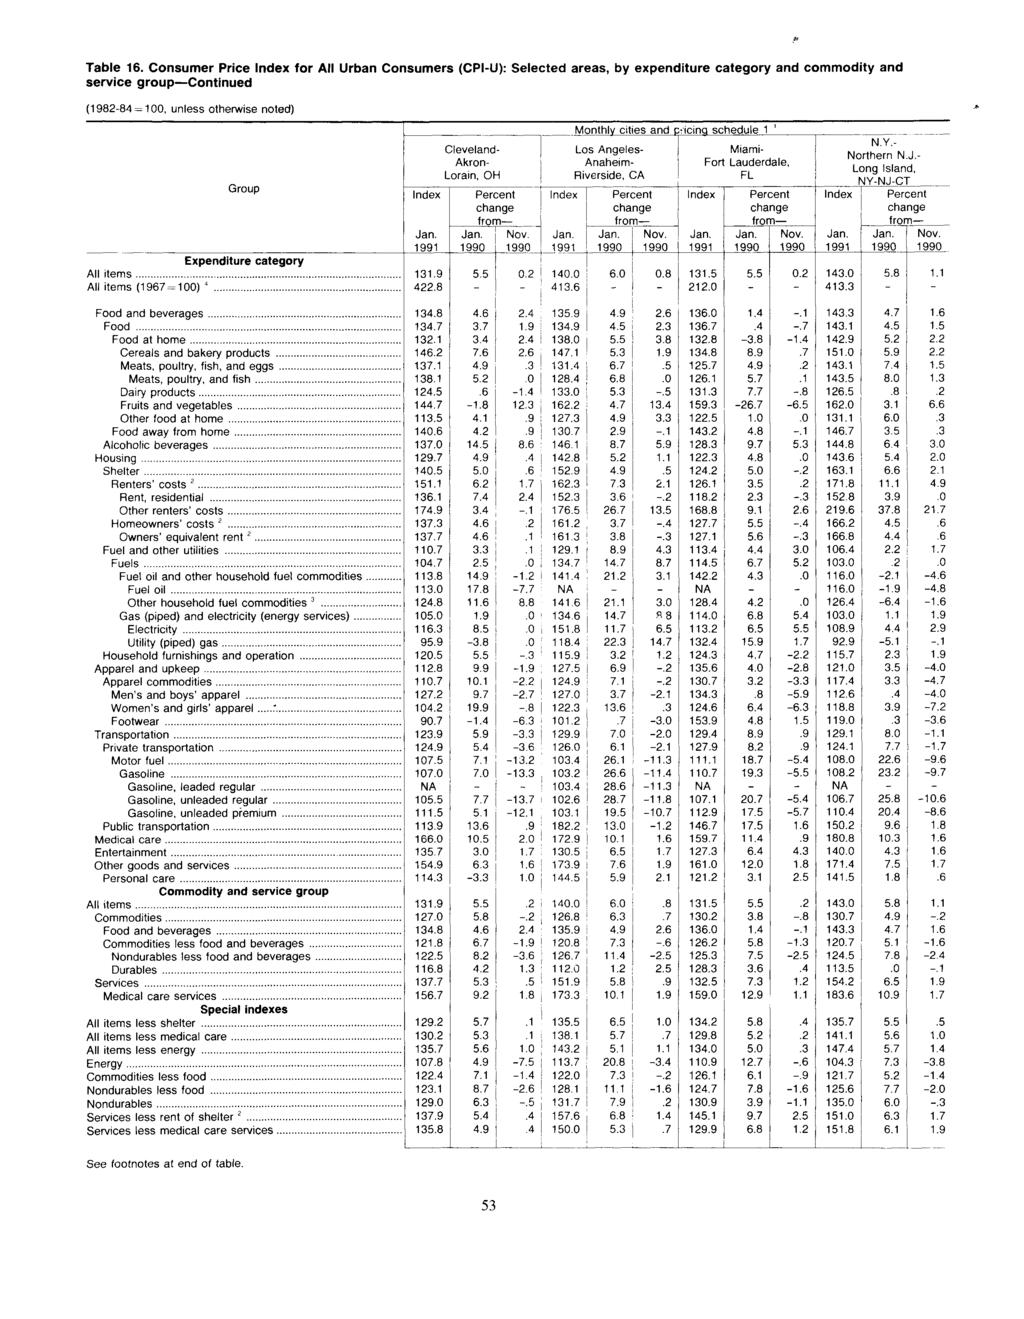 Table 16. Consumer Price for All Urban Consumers (CPI-U): Selected areas, by expenditure category and commodity and service group Continued Cleveland- Akron- Lorain, OH Nov.